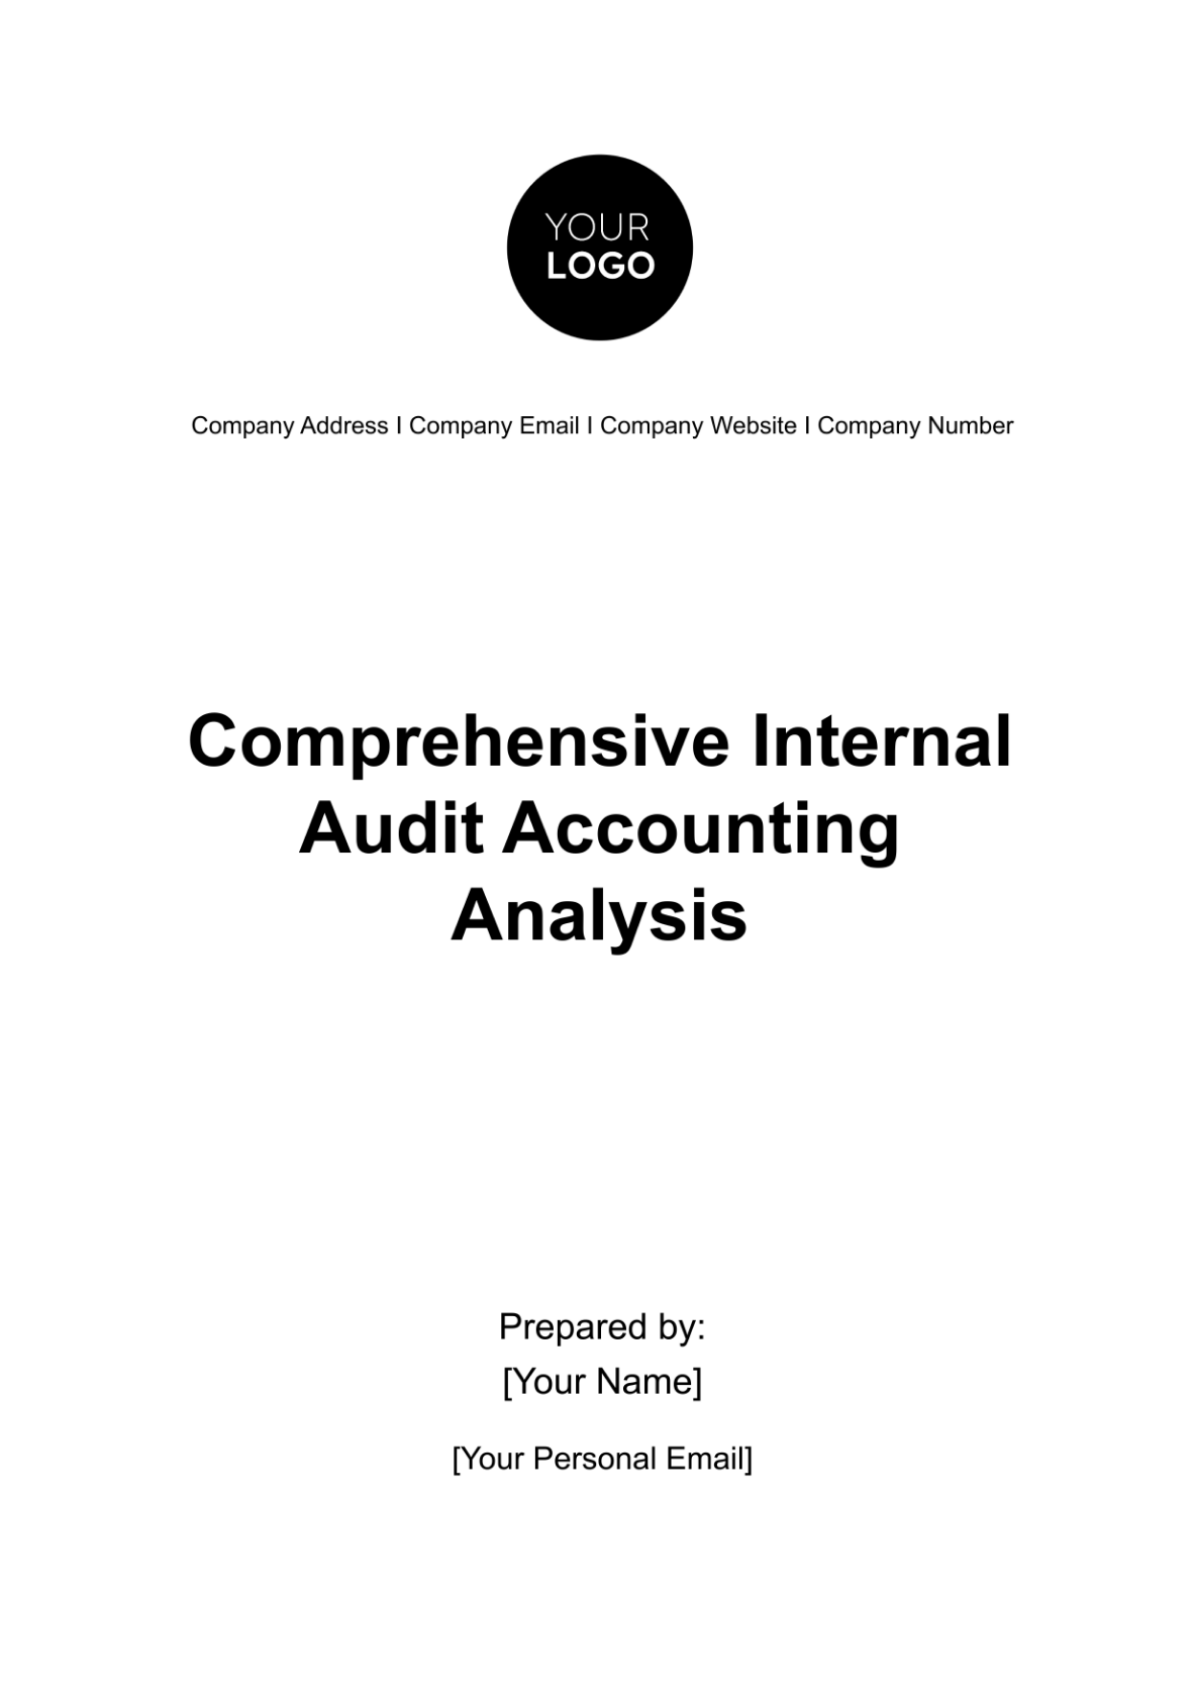 Comprehensive Internal Audit Accounting Analysis Template